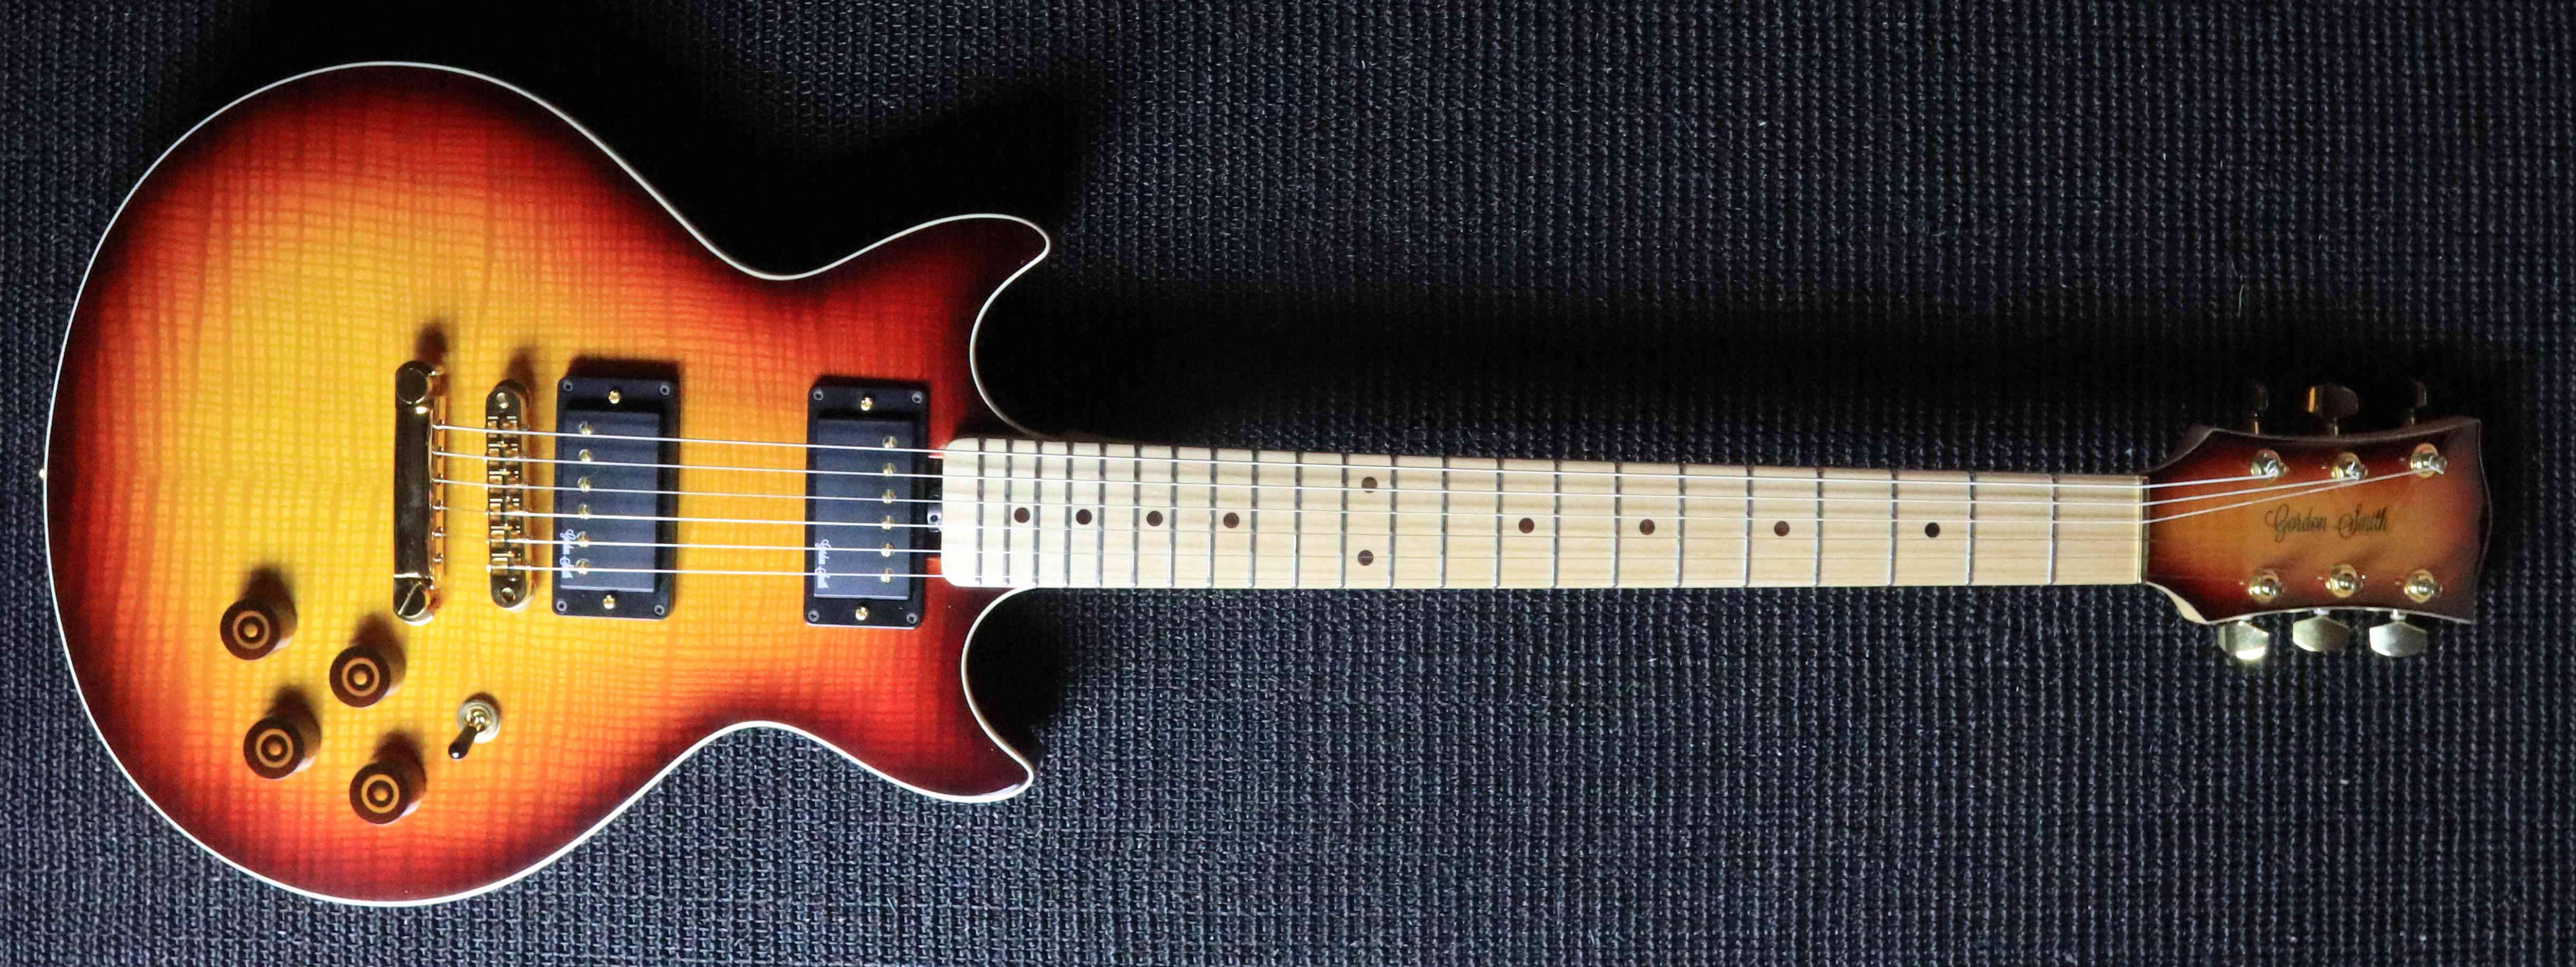 Gordon Smith Heritage Deluxe, Electric Guitar for sale at Richards Guitars.